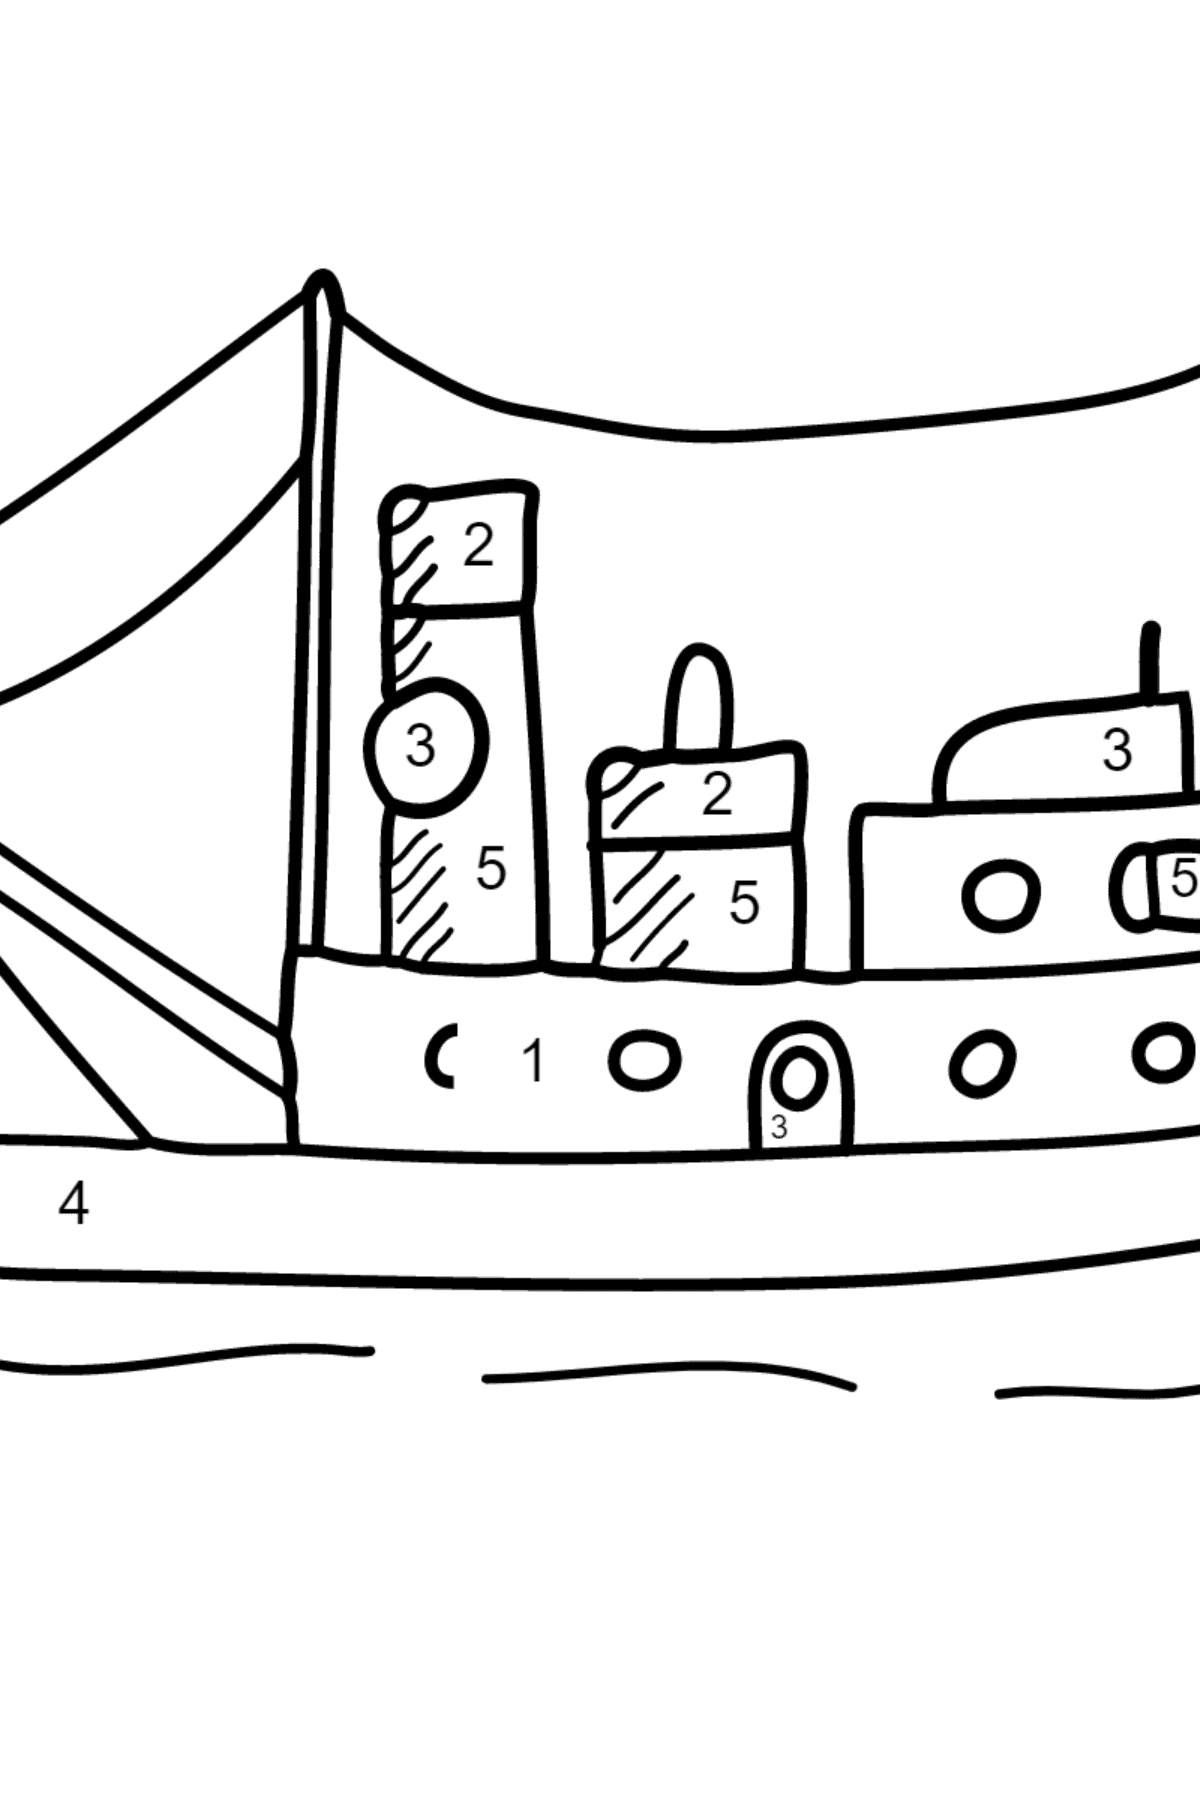 Coloring Page - A Cargo Ship - Coloring by Numbers for Kids